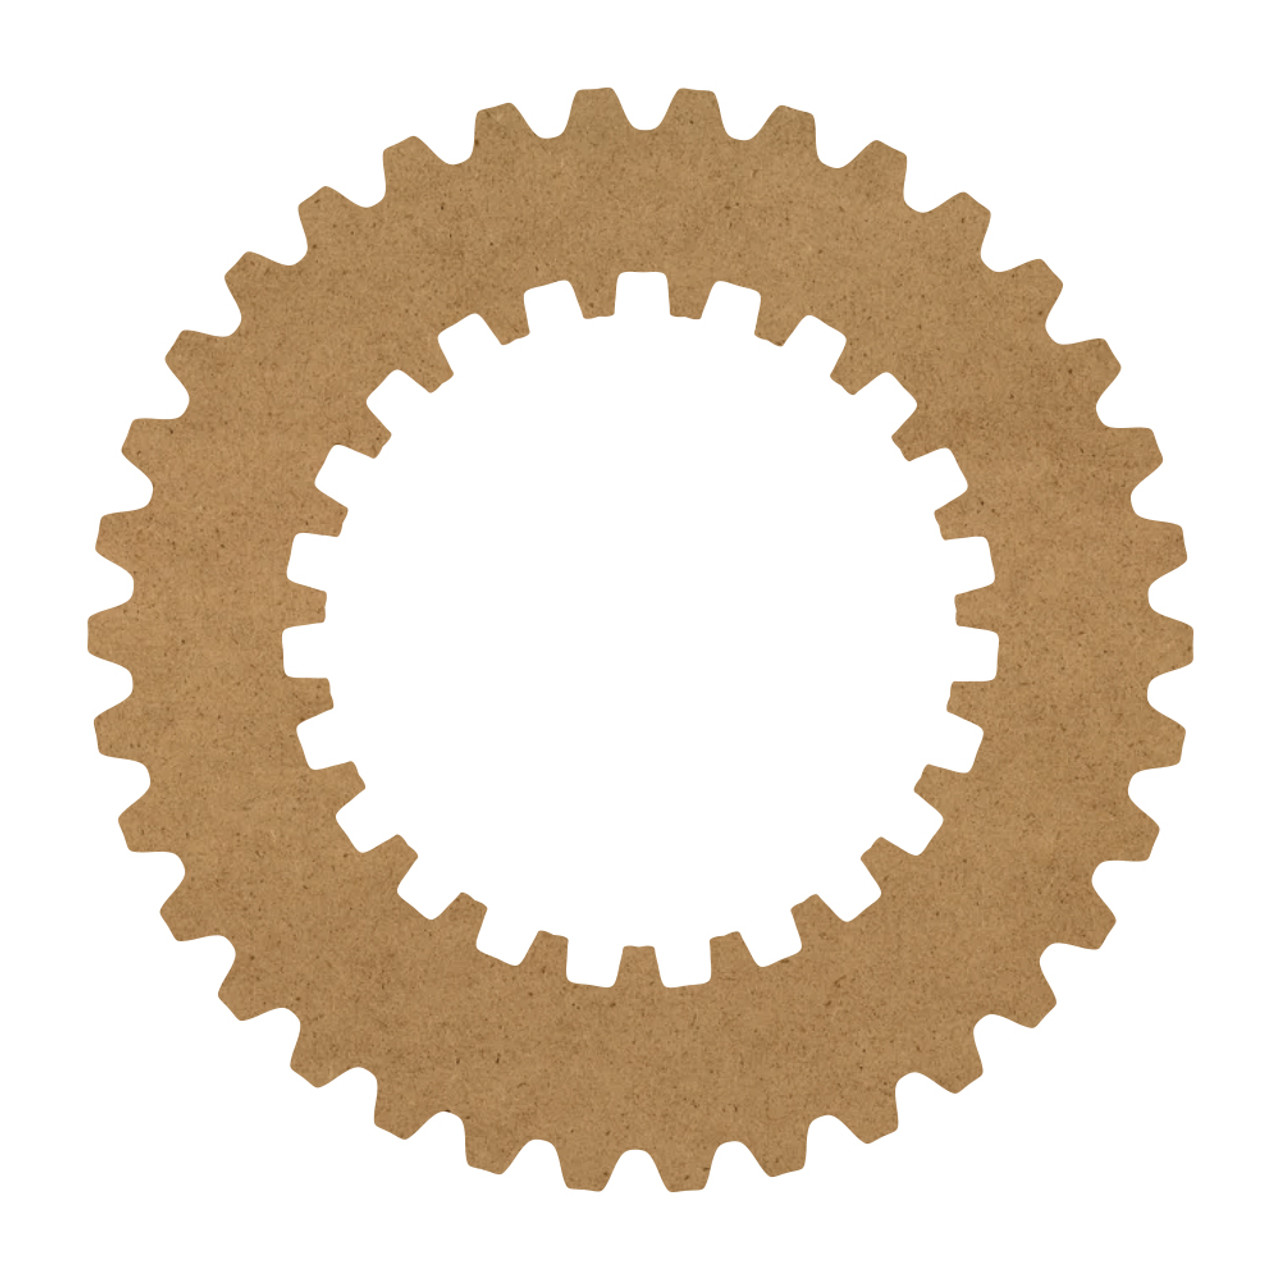 Spur Gear Wood Surface - 15" x 15" - WDSF1413_4